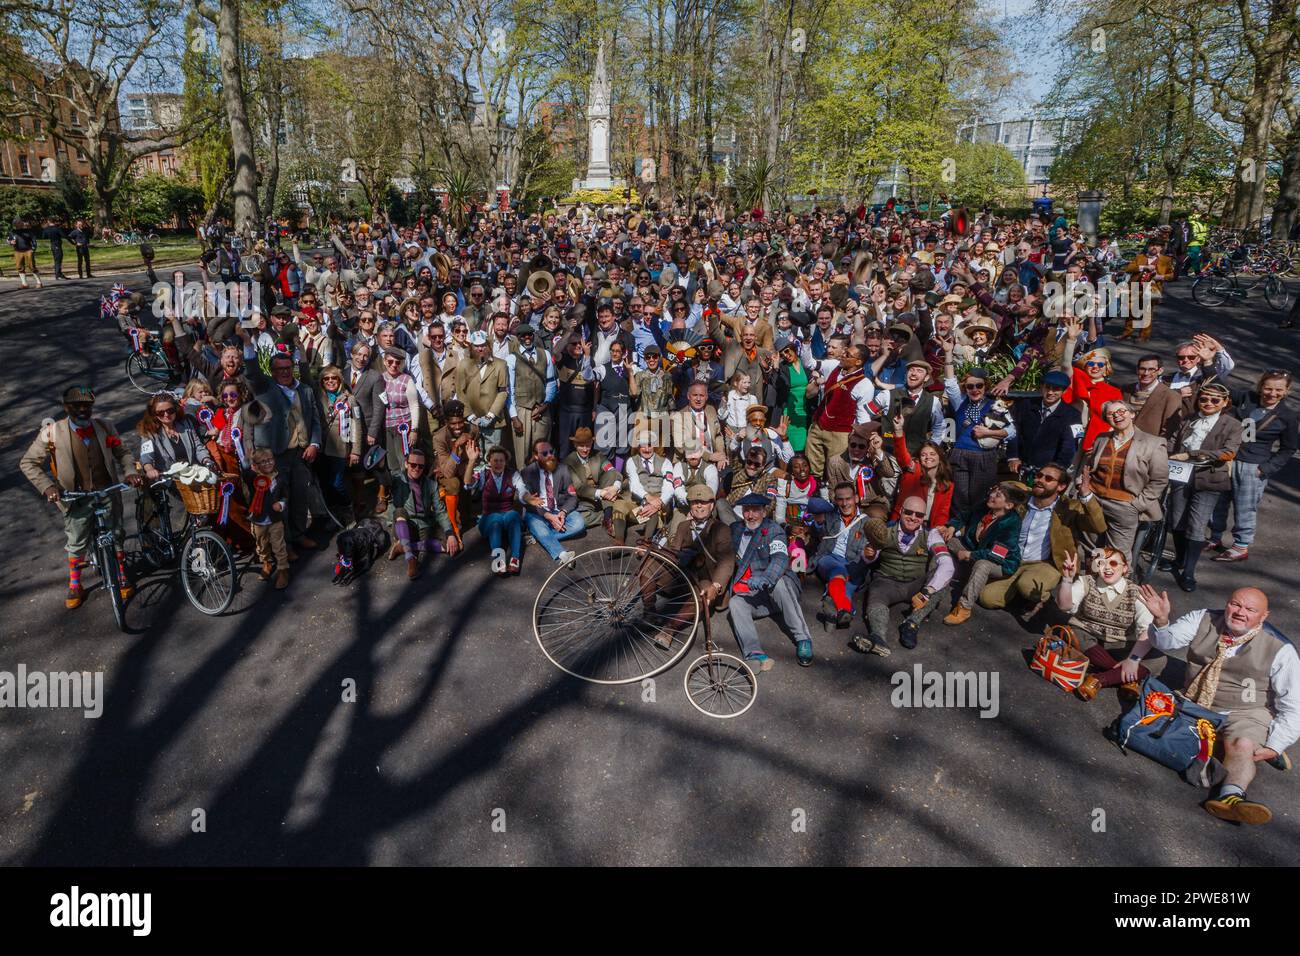 Participants of the Tweed Run 2023 event in London pose for a group photograph. Stock Photo